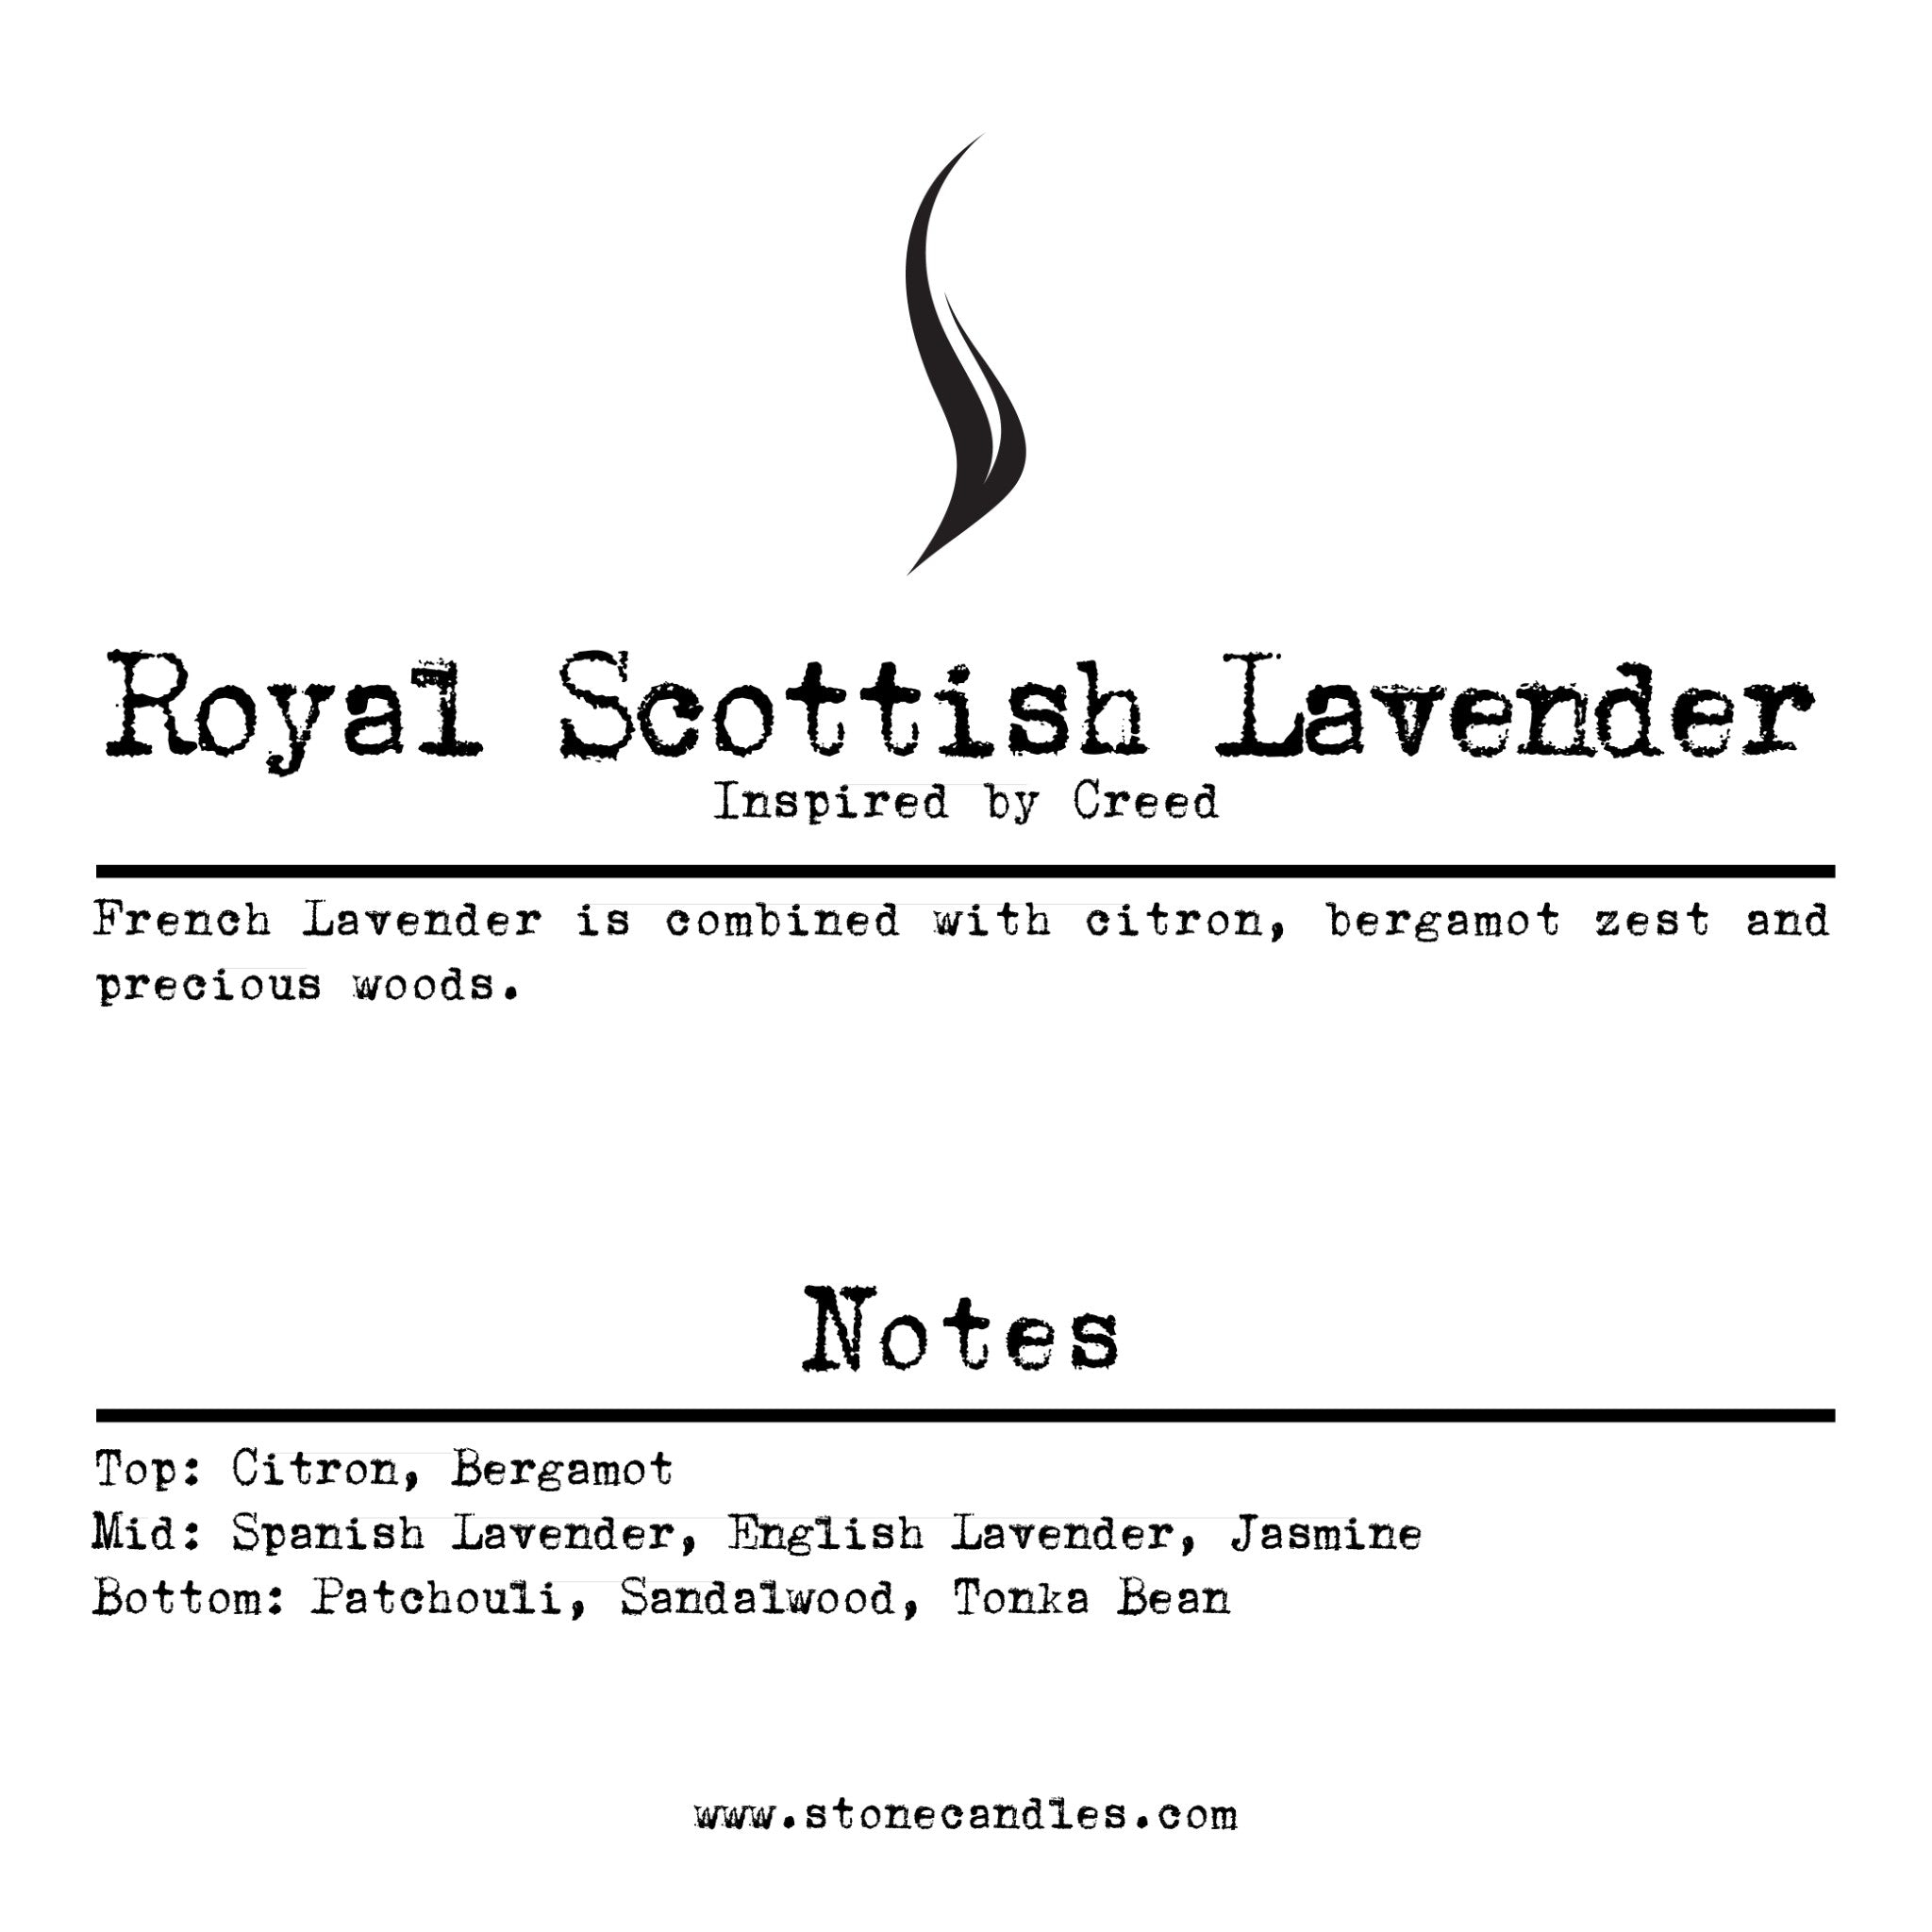 Stone Candles Scent Strip Royal Scottish Lavender (Inspired by Creed)